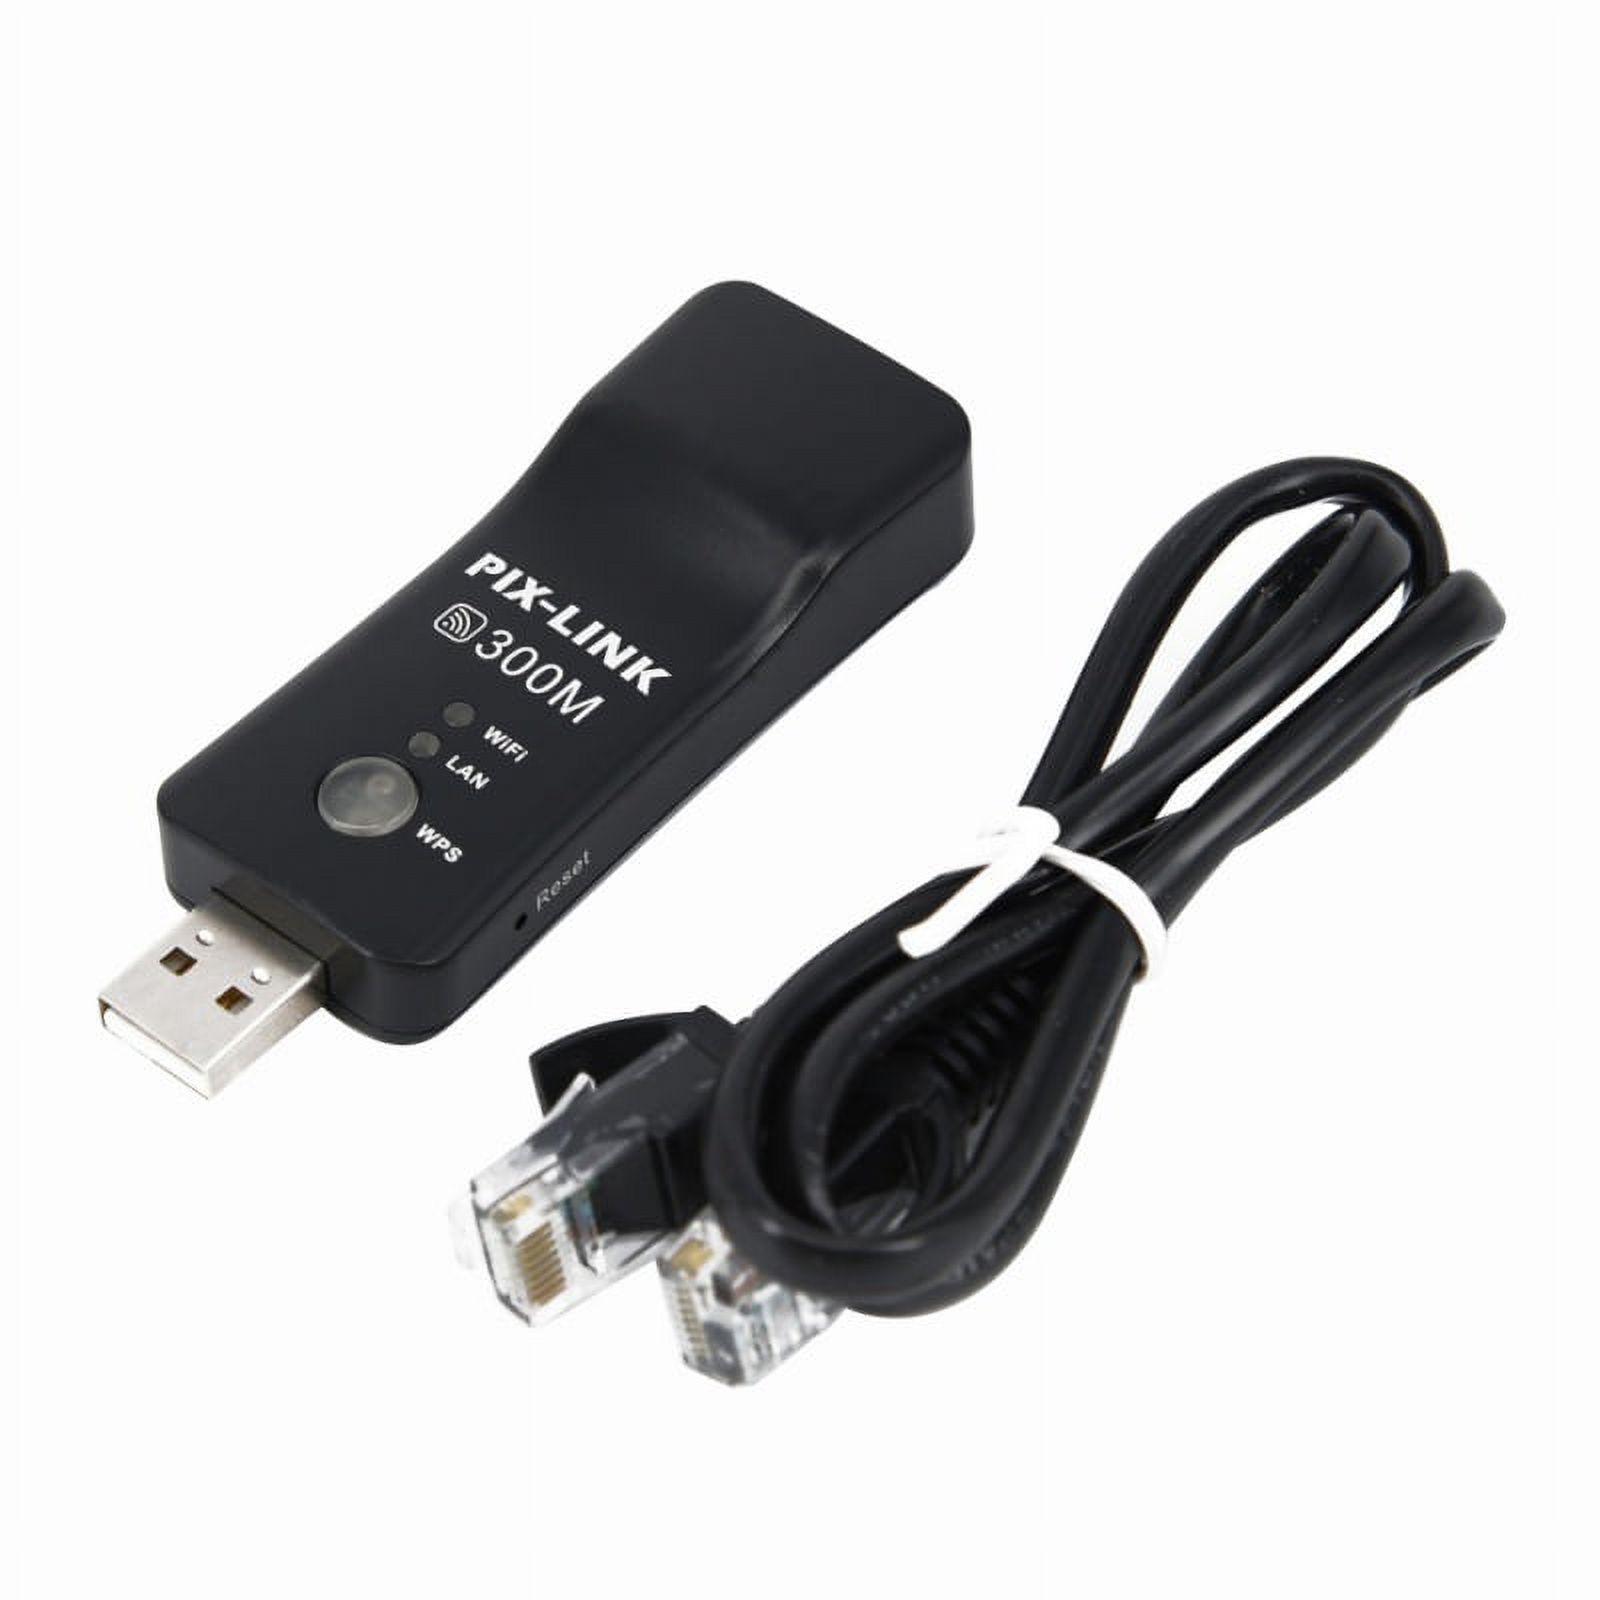 USB Wireless LAN Adapter WiFi Dongle for Smart TV Blu-Ray Player BDP-BX37 - image 2 of 8